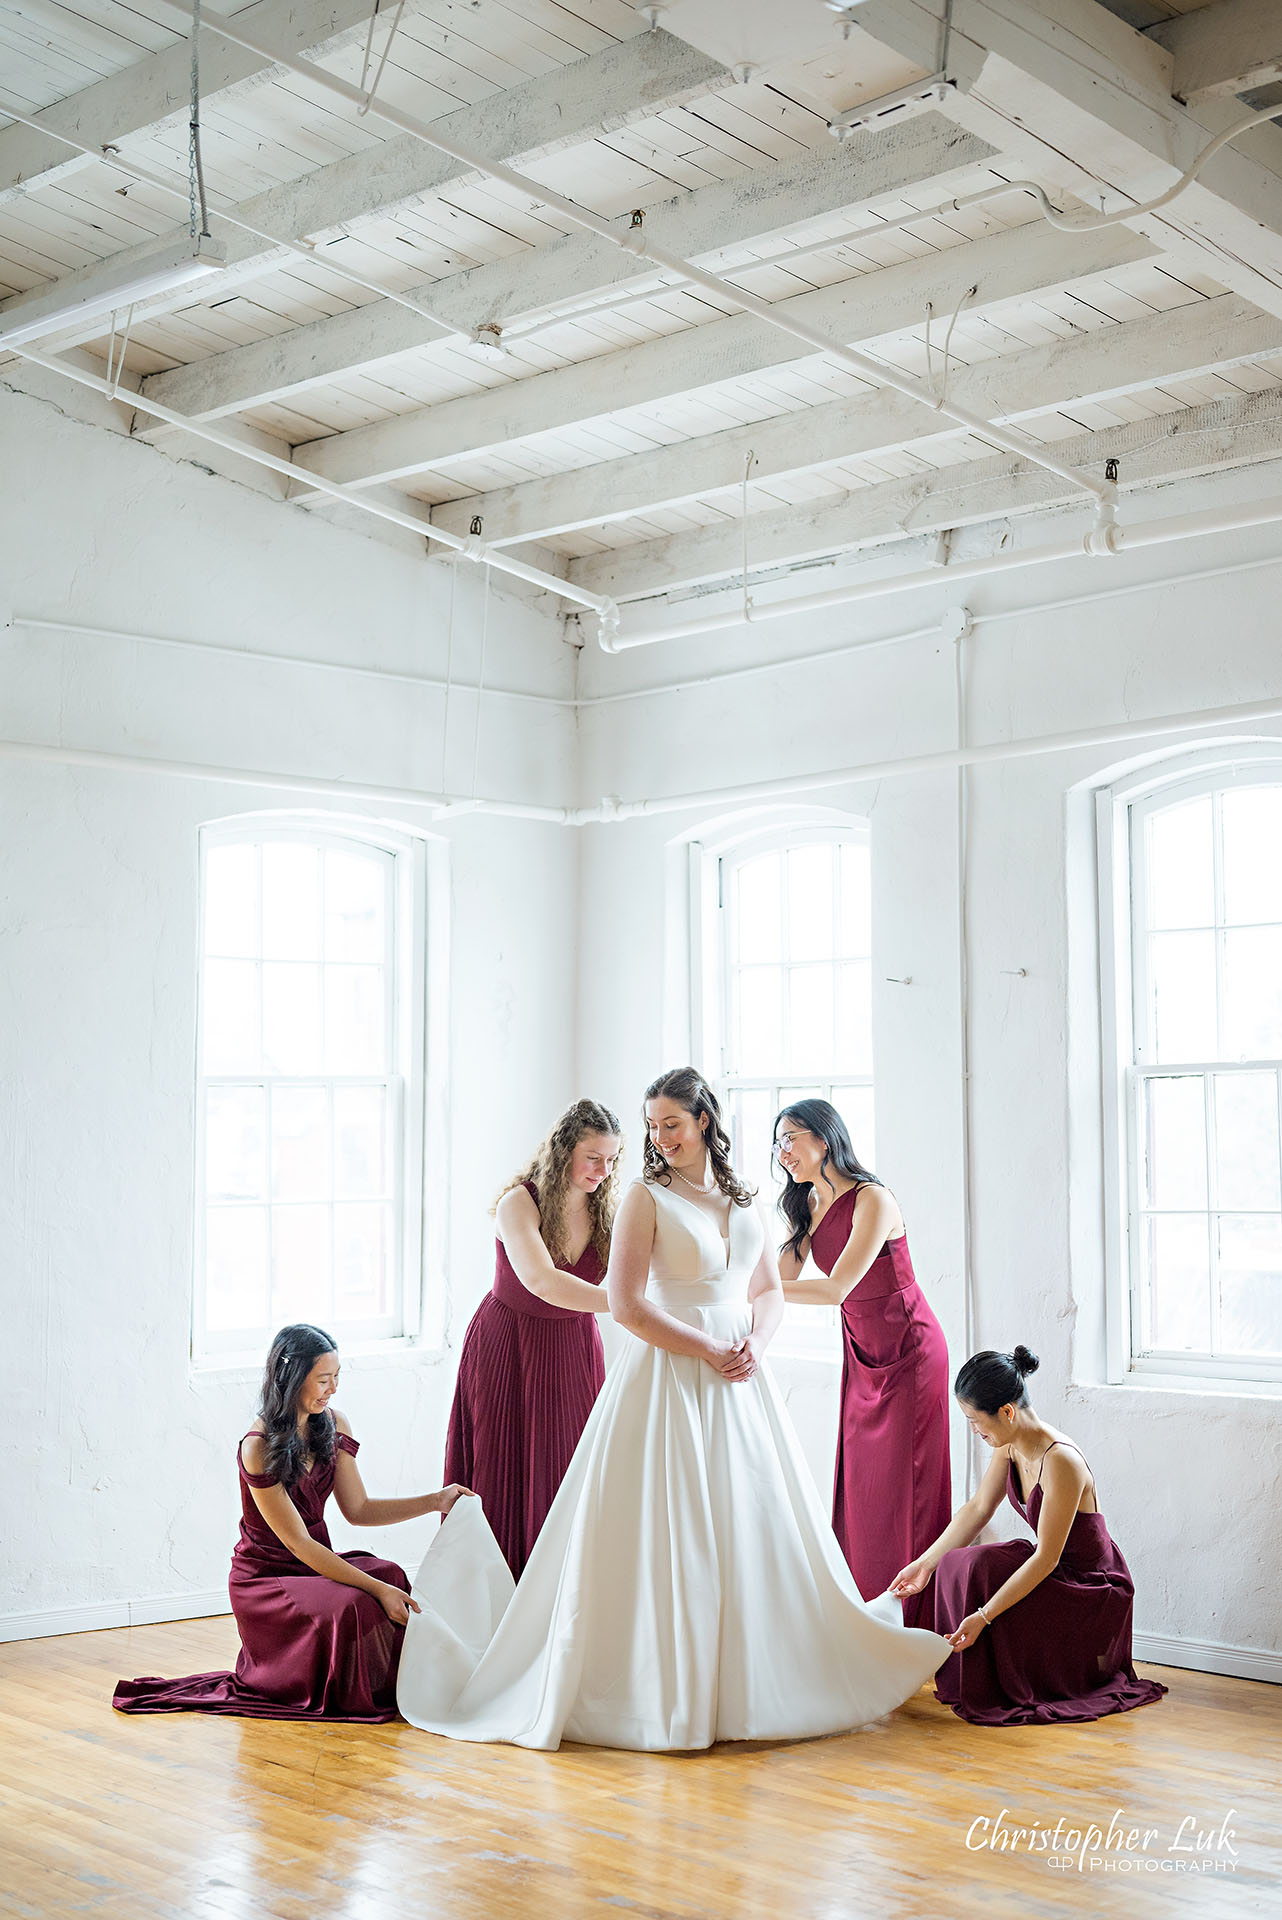 Wedding Party Bridal Getting Ready Bride Bridesmaids Red Dresses Gowns Group Photo Vintage White Loft Studio Kitchener Waterloo Winter Christmas Portrait Natural Candid Photojournalistic Happy Smile